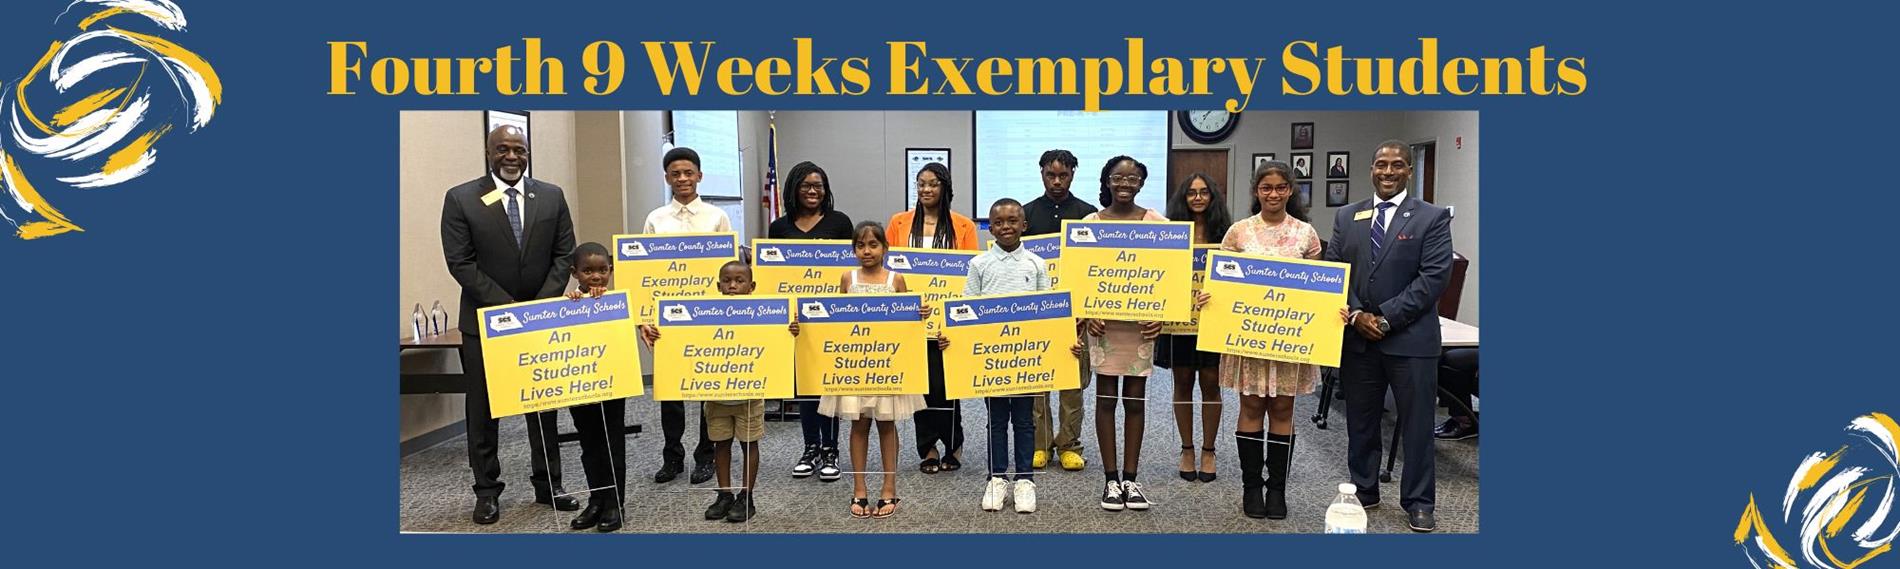 Exemplary Students for the Fourth 9 Weeks of the 2022-2023 School Year